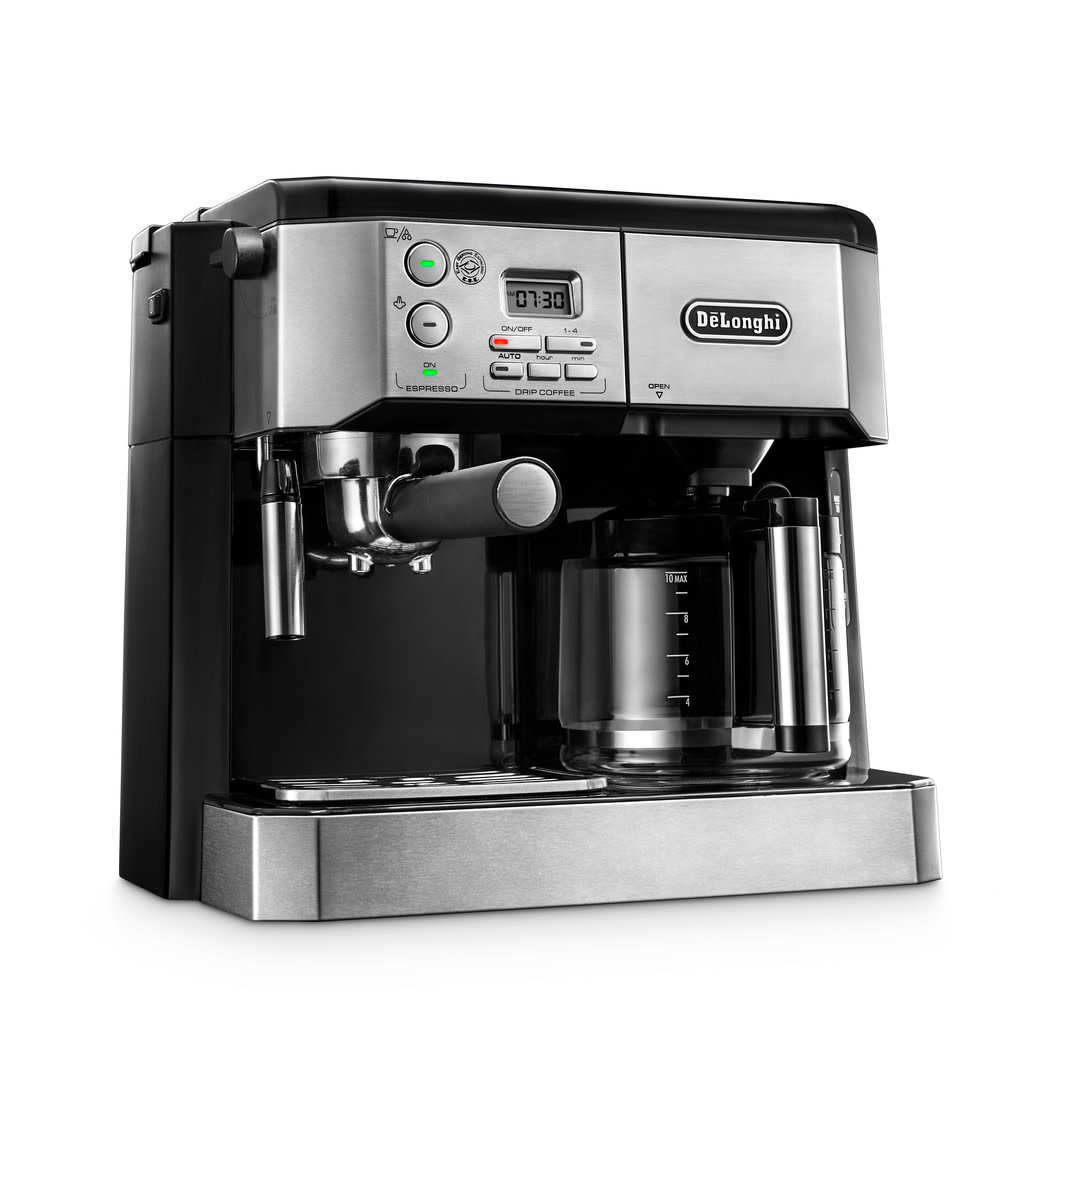 DeLonghi BCO 420 Coffee Machine Active Carbon Water Filter